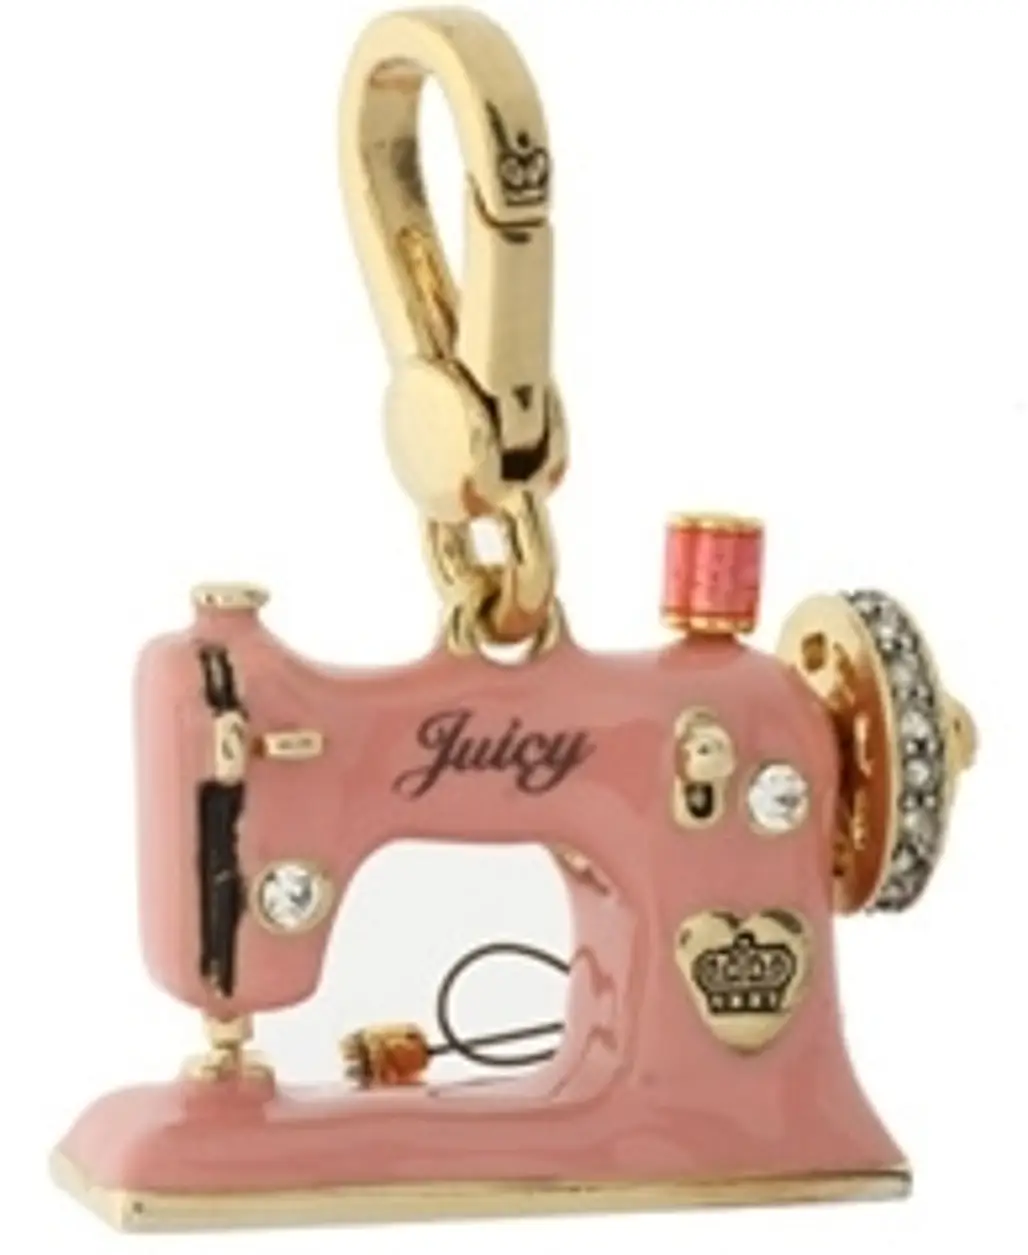 Juicy Couture Pink Sewing Machine Charm